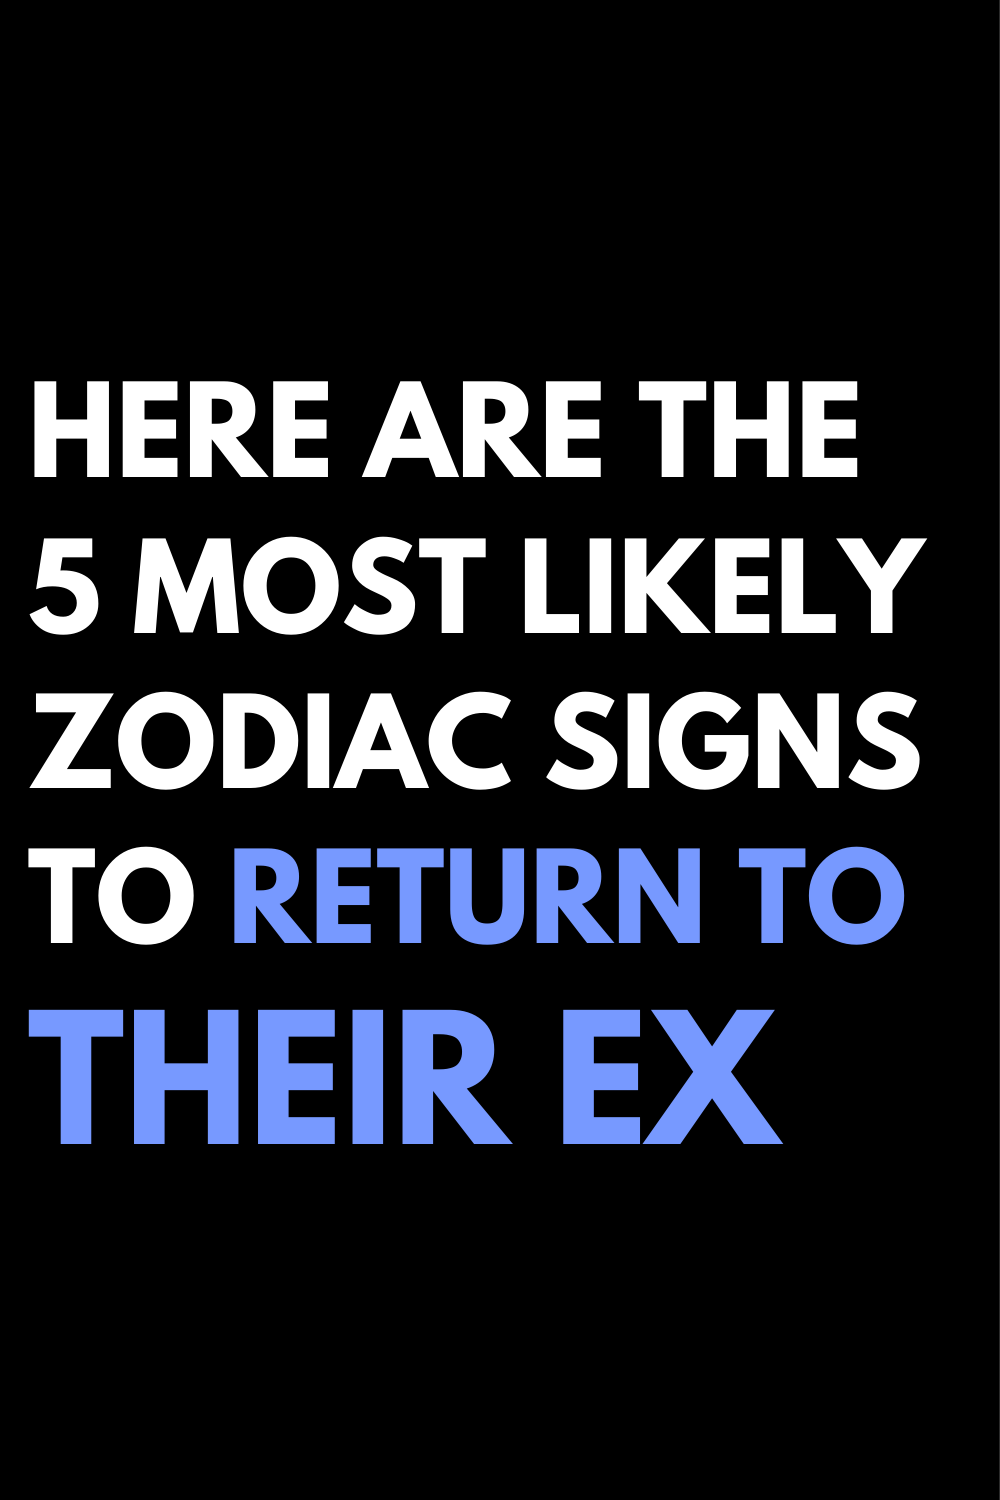 Here Are The 5 Most Likely Zodiac Signs To Return To Their Ex